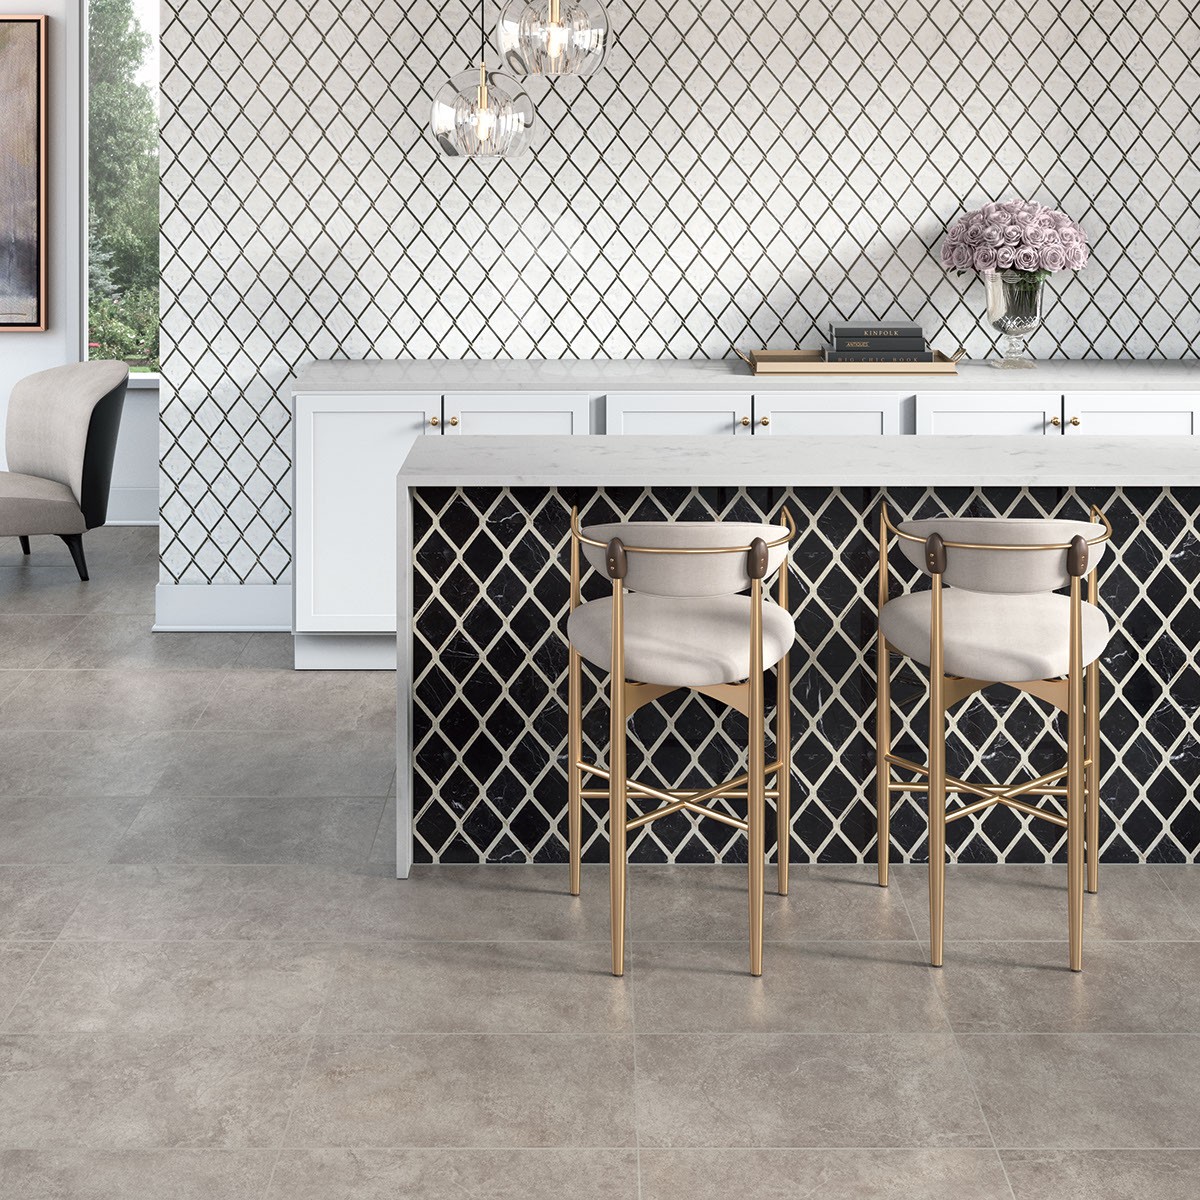 Tile flooring with a counter bar | Allied Flooring & Paint